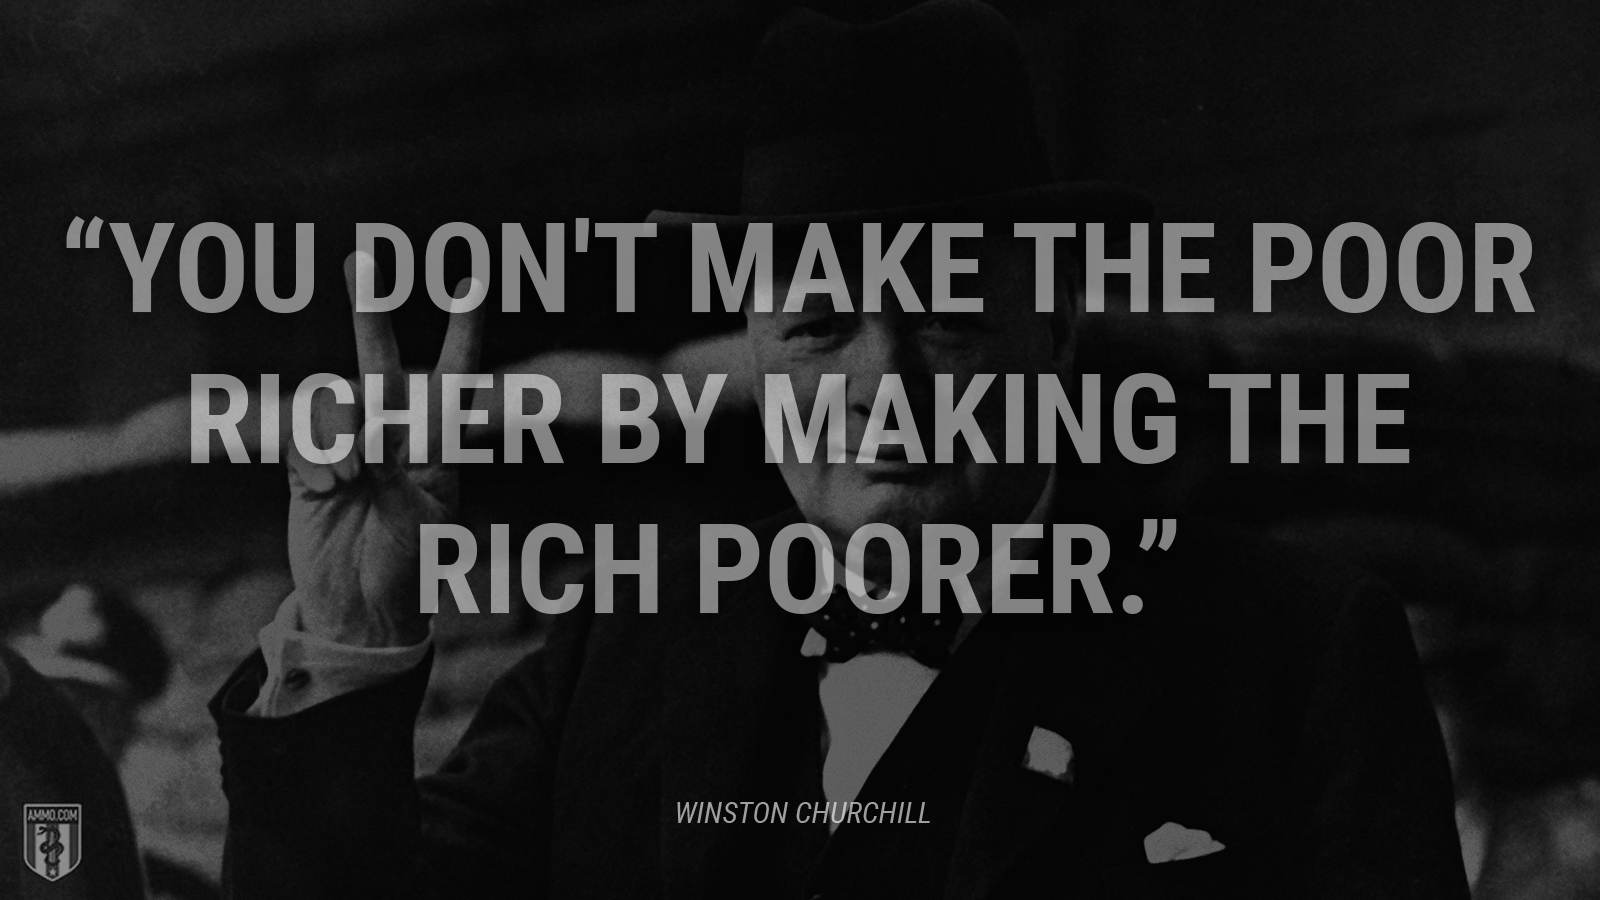 “You don't make the poor richer by making the rich poorer.” - Winston Churchill